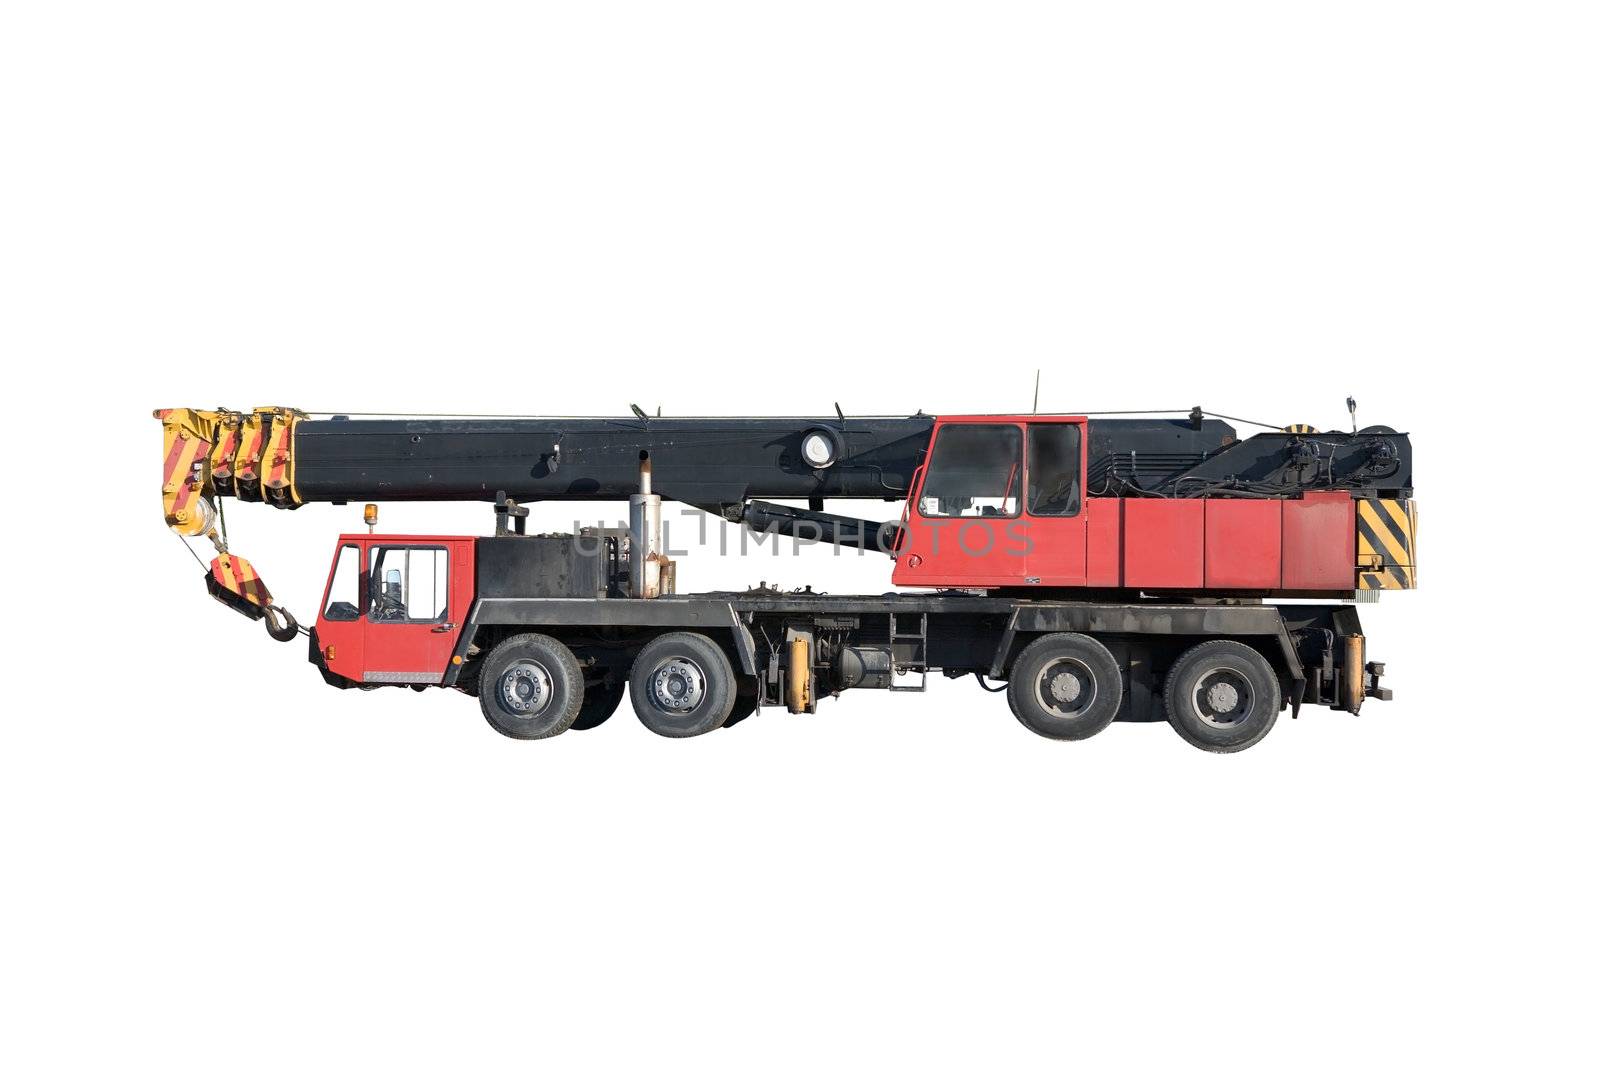 Mobile hydraulic truck crane in transport position isolated on a white background.